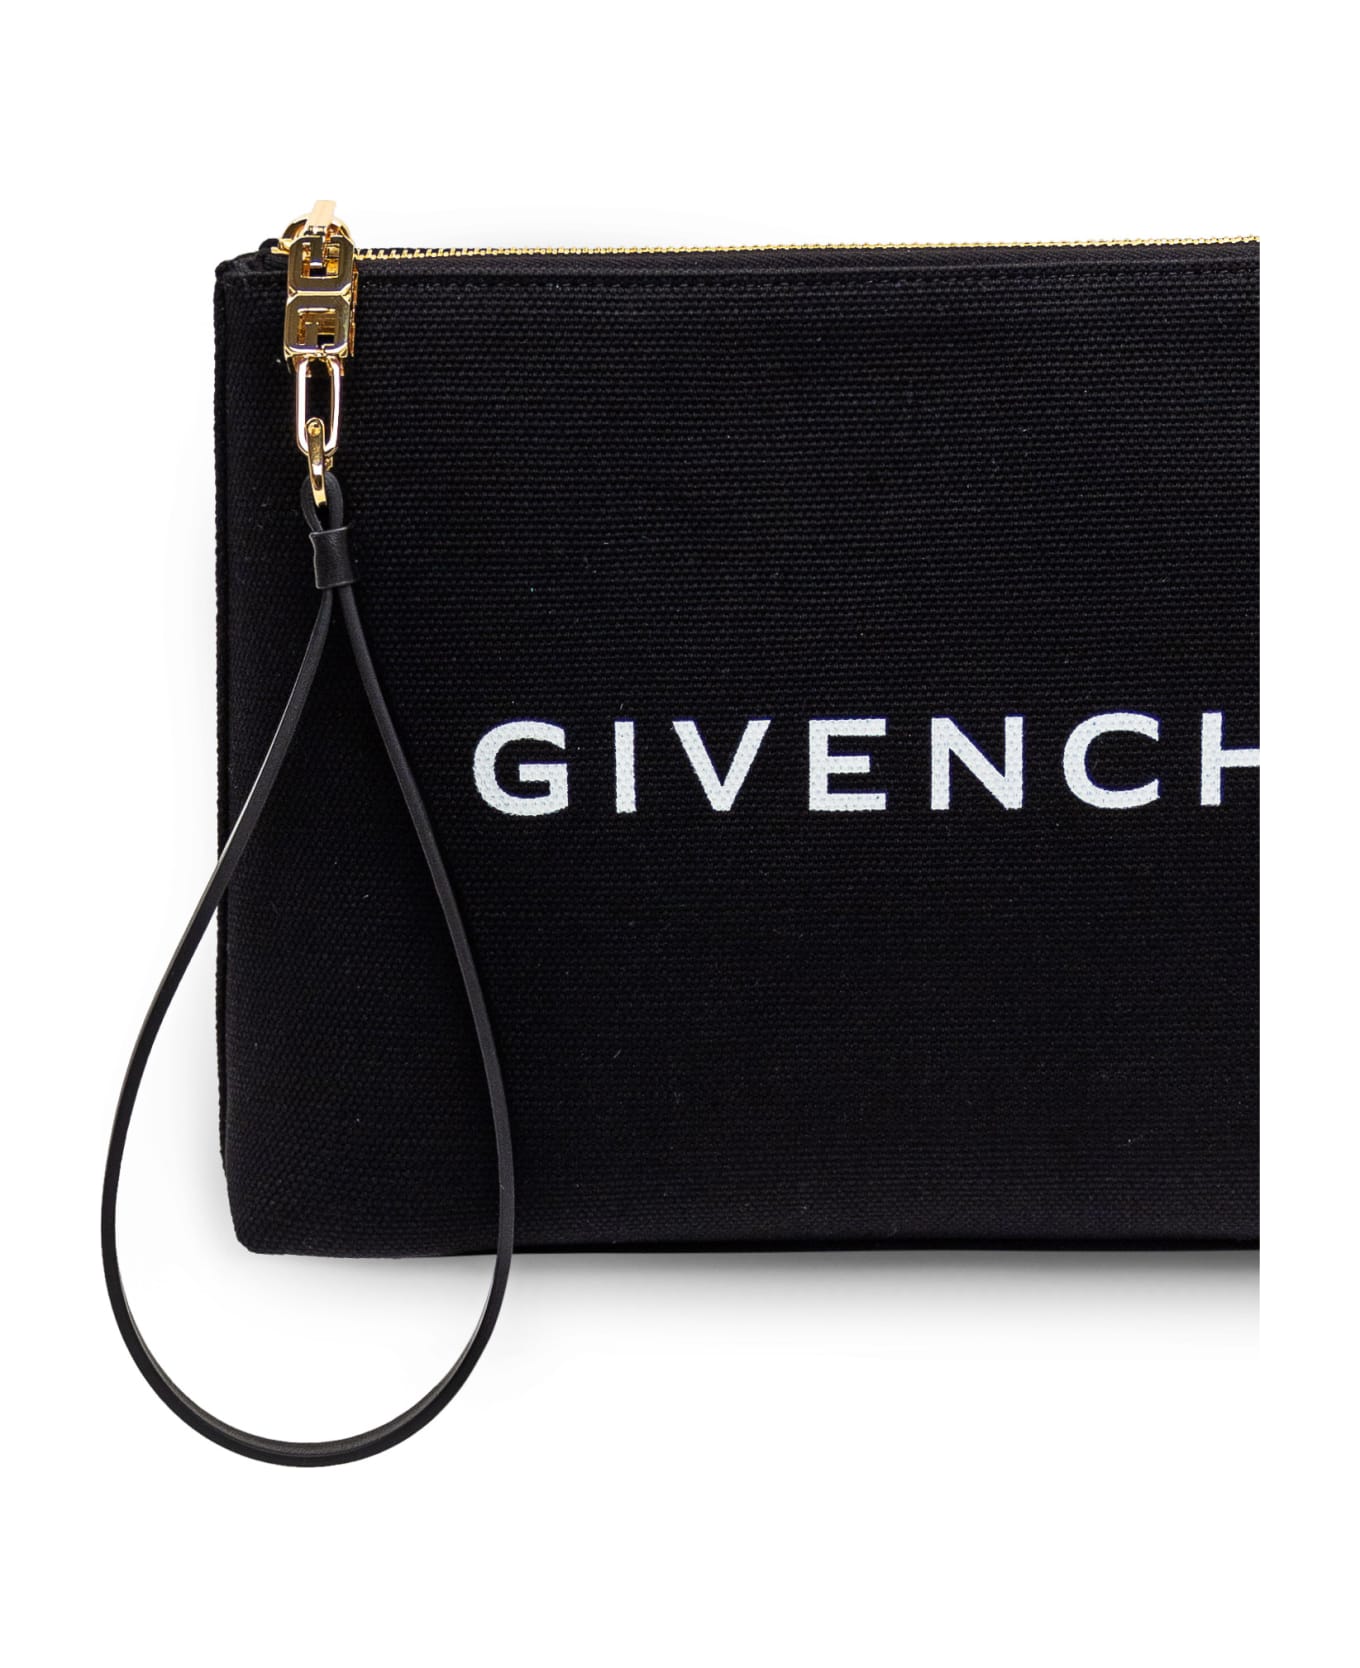 Givenchy Travel Pouch Clutch - Black